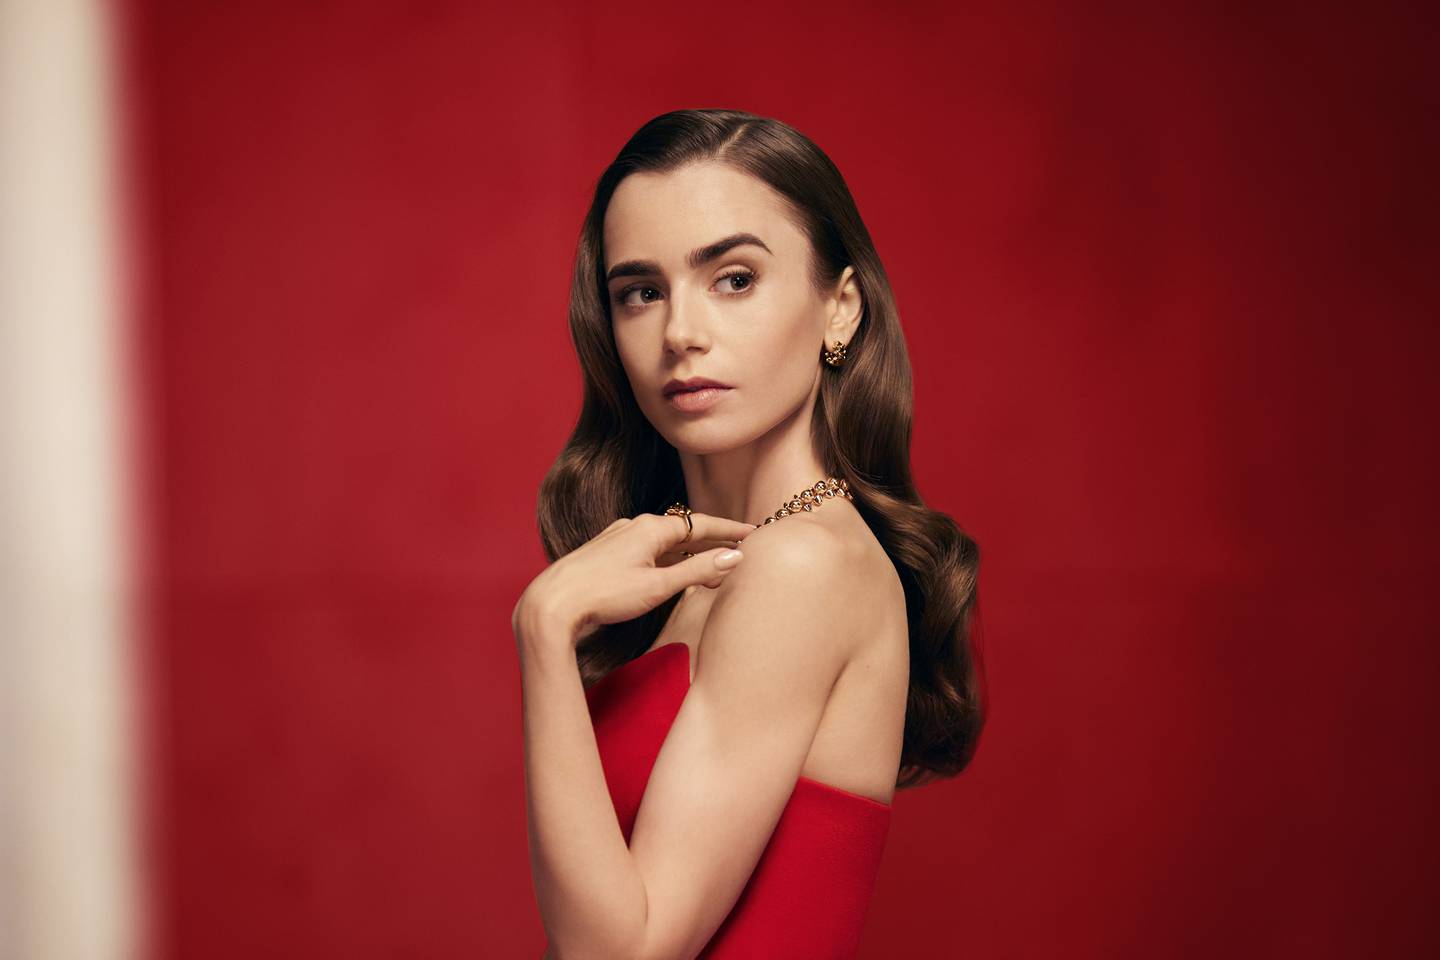 Lily Collins wears jewellery from Cartier's "Clash" collection for the brand's 2021 holiday campaign. Cartier.